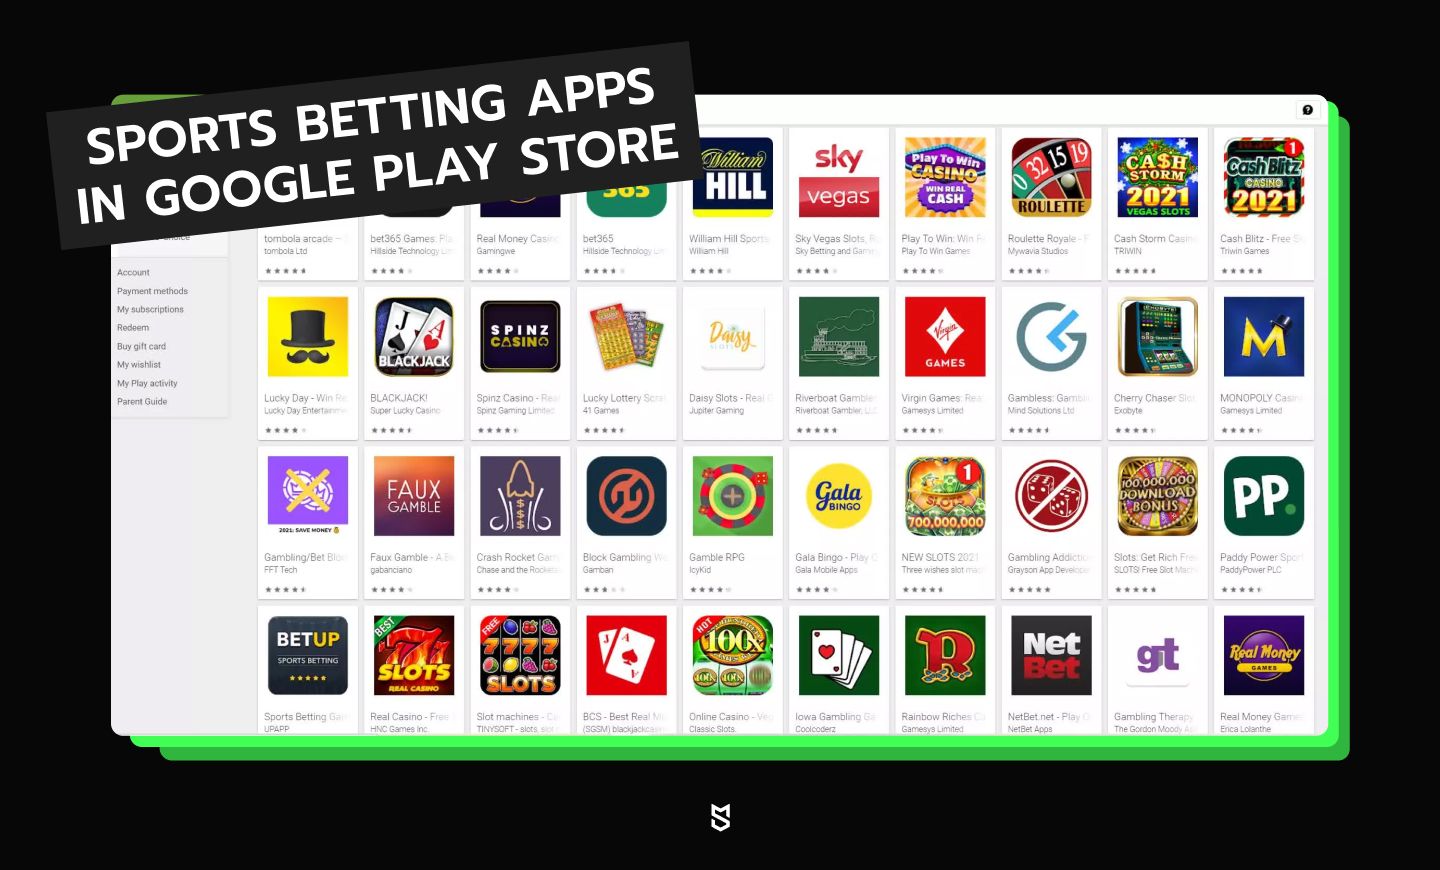 Sports betting apps in Google Play Store